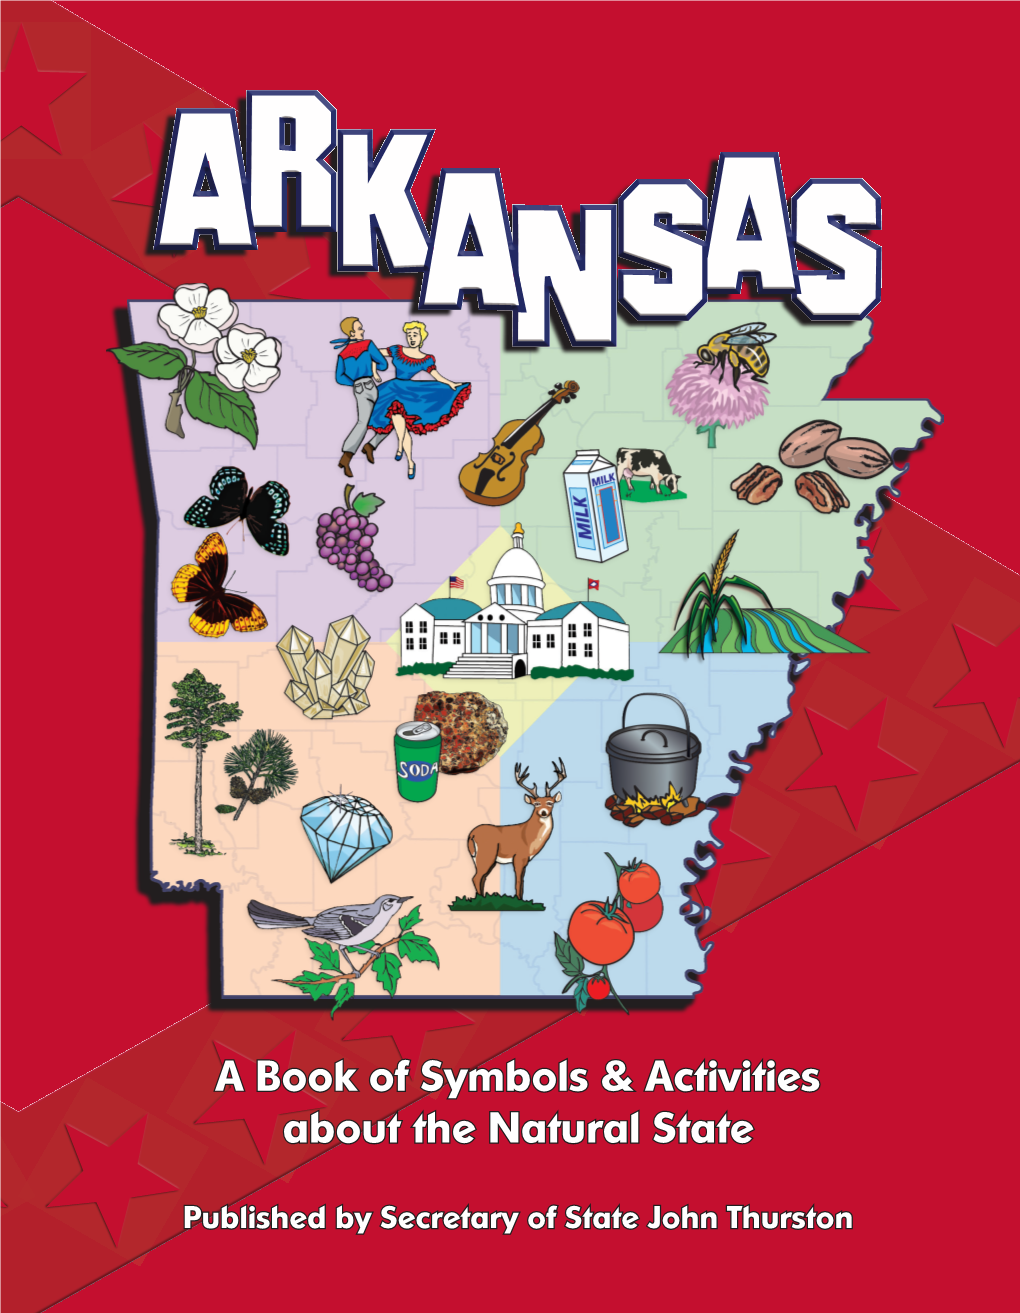 A Book of Symbols & Activities About the Natural State